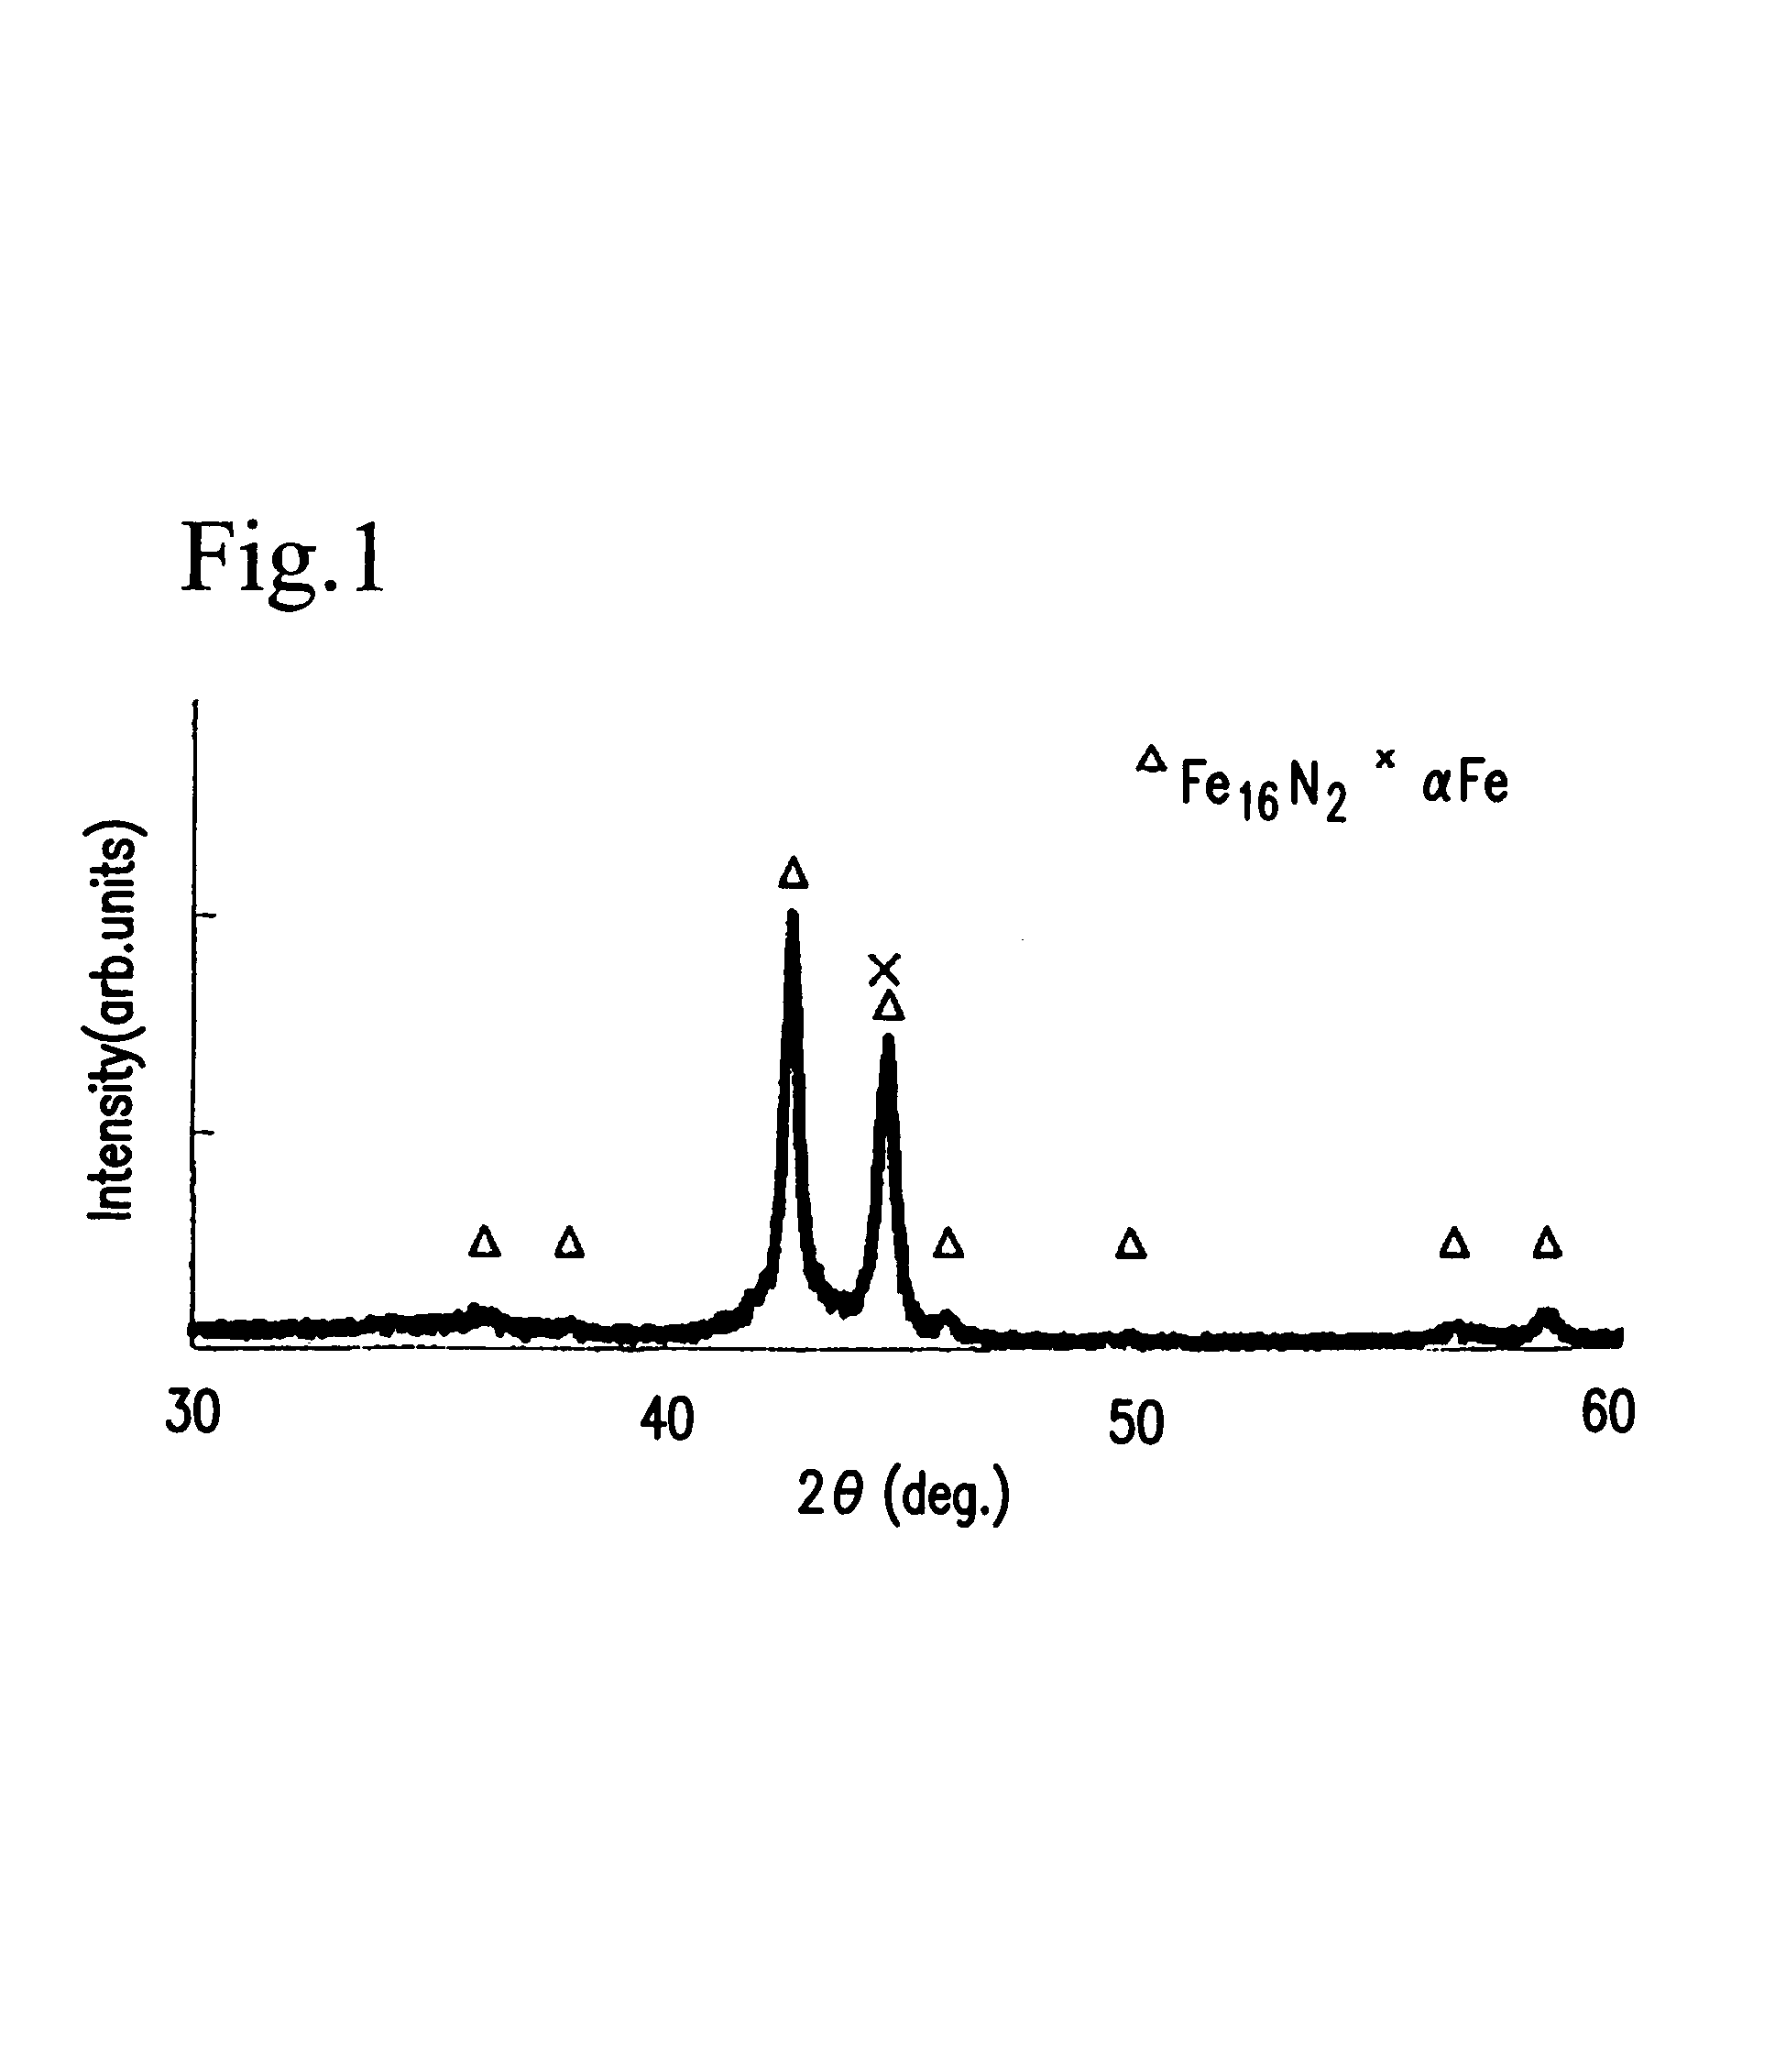 Magnetic recording medium containing particles with a core containing a Fe16N2 phase